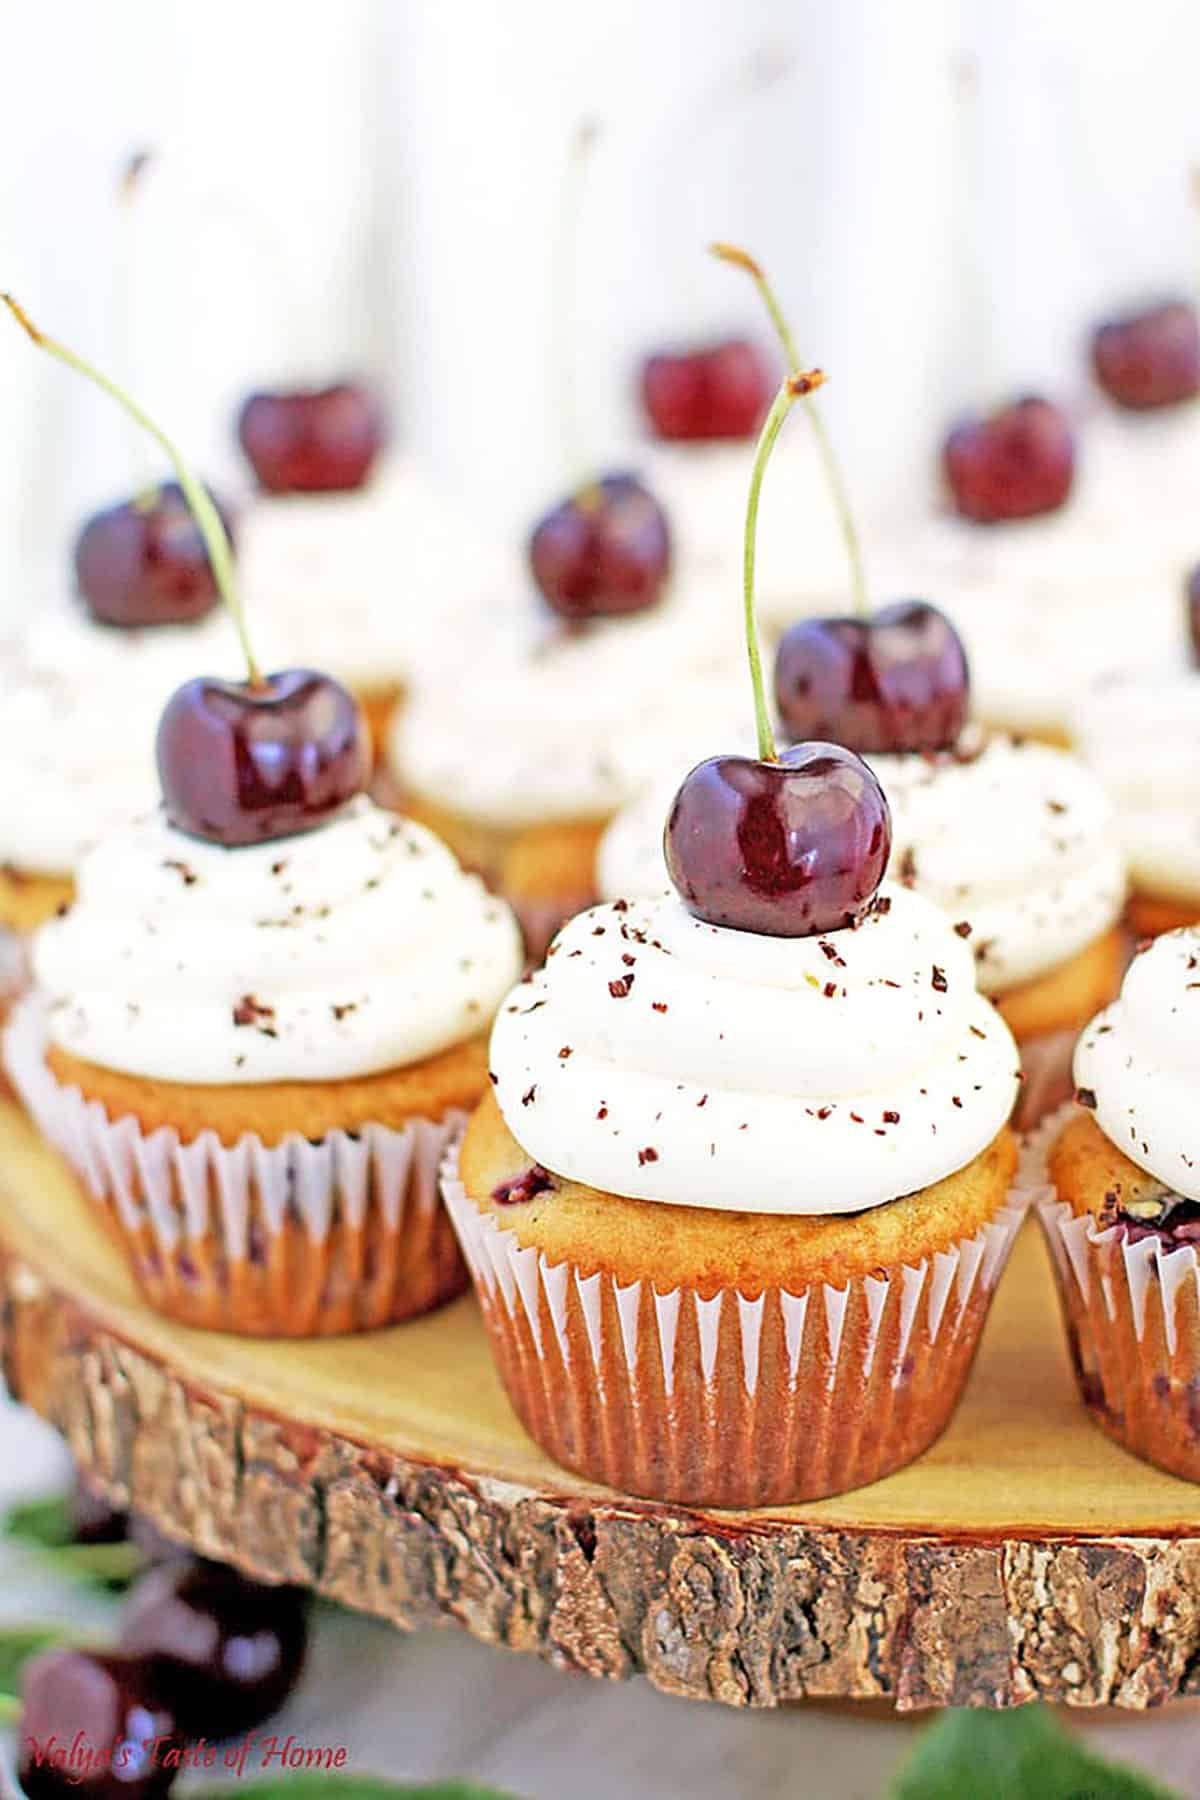 If you're looking to use up some cherries during this cherry season, then these Cherry Cupcakes are perfect for you! 